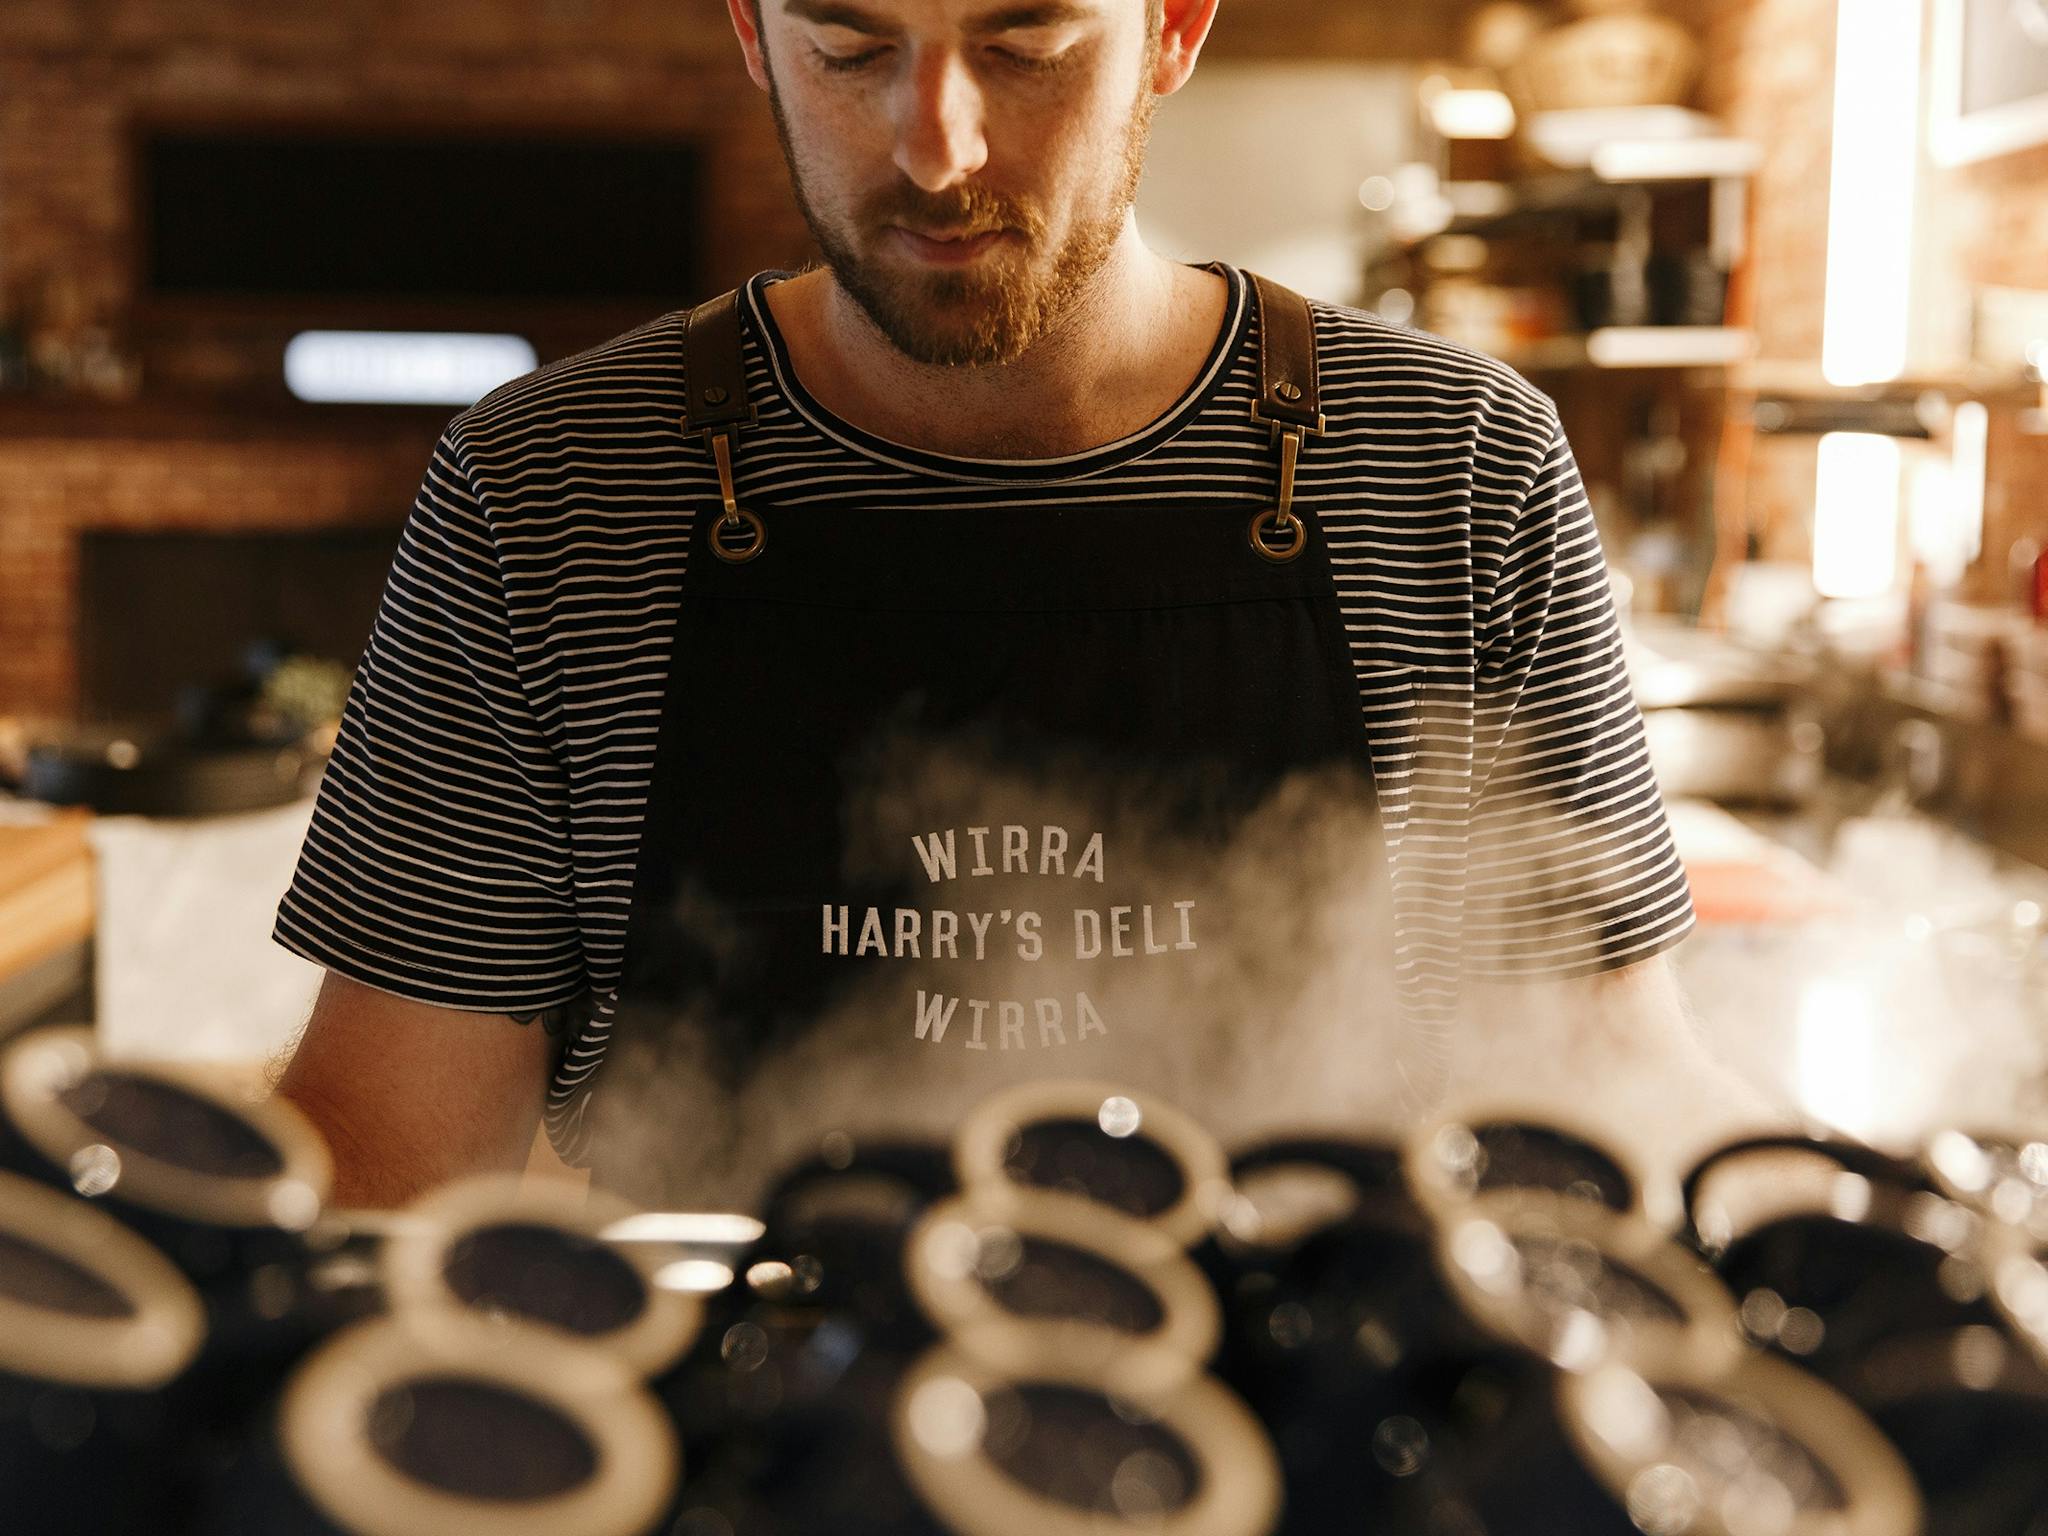 “Original Blend” coffee created exclusively for Harry’s Deli by Dawn Patrol of Kangarilla